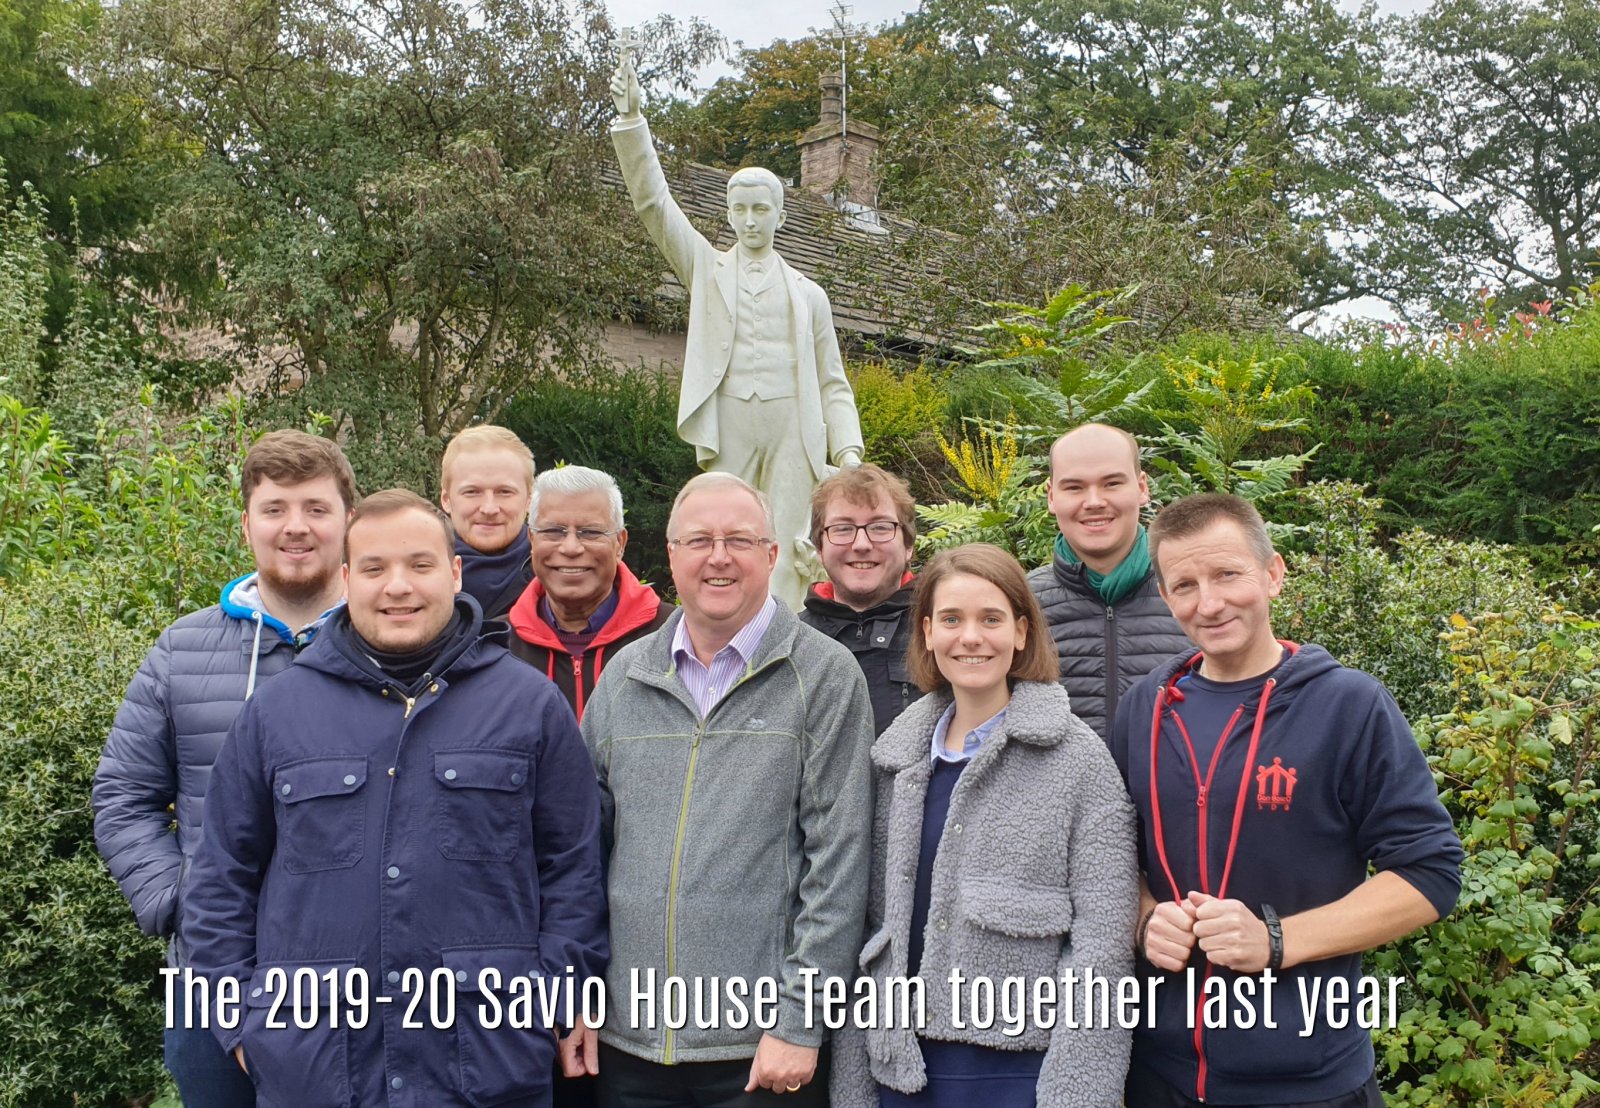 Savio House Team is "together apart" on their patron's feast day 